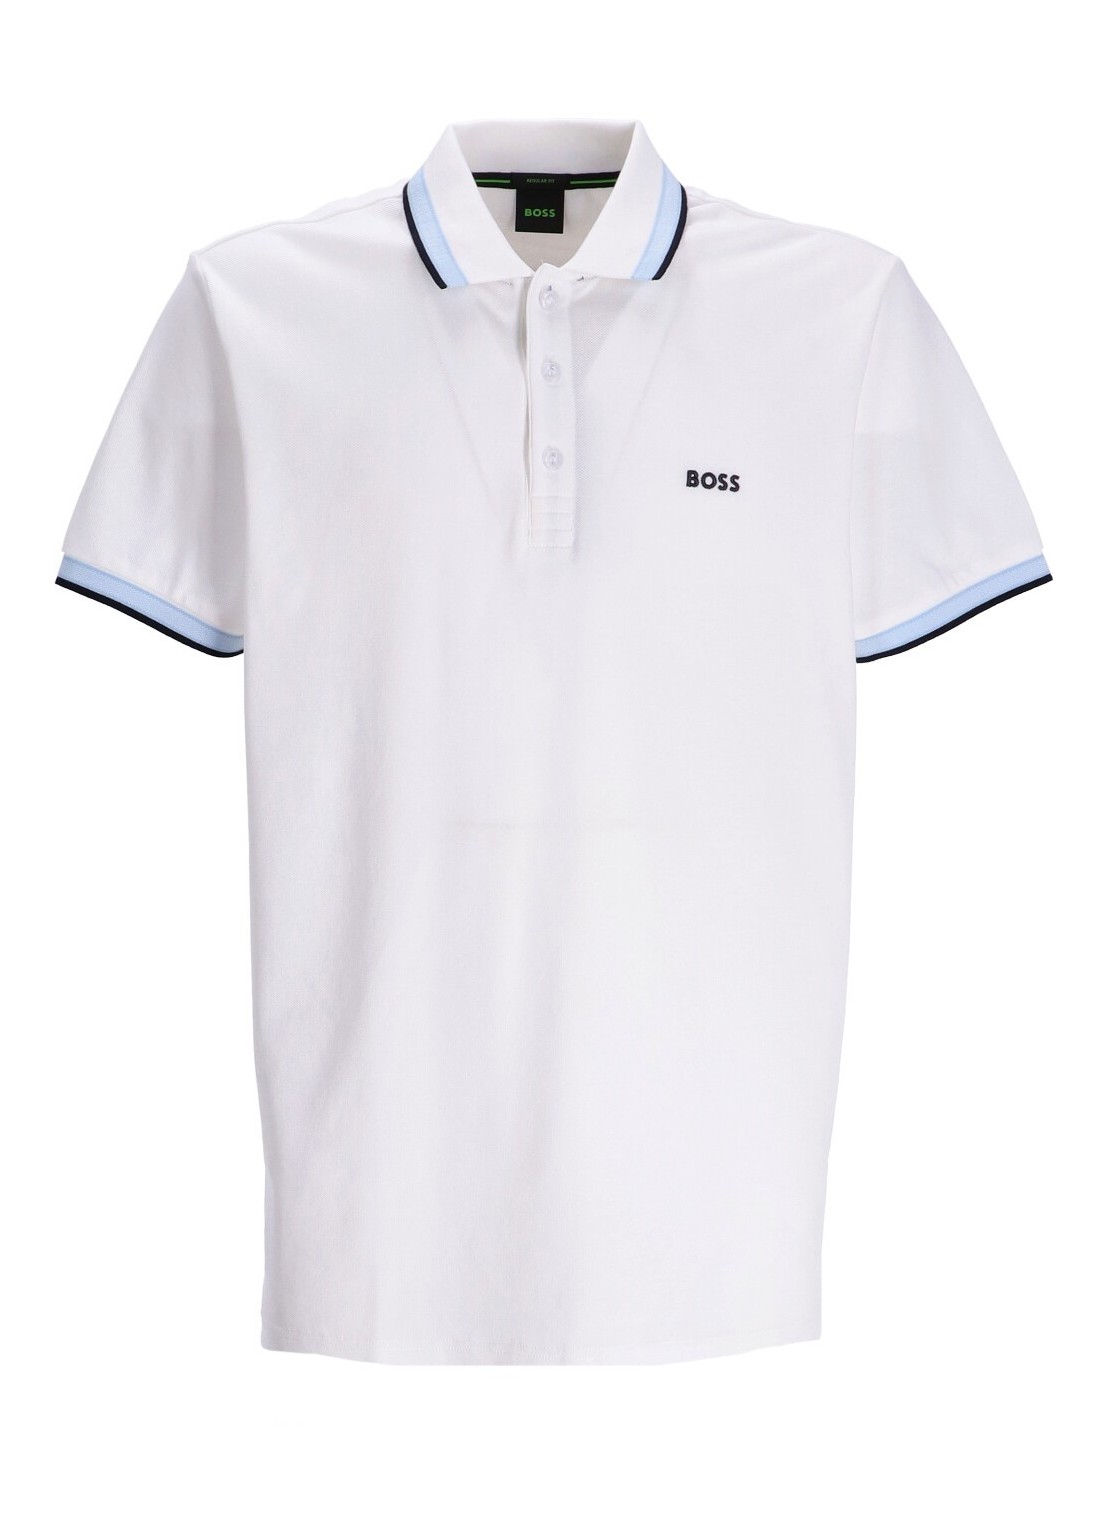 Polo boss paddy curved - 50468983 103 talla XL
 